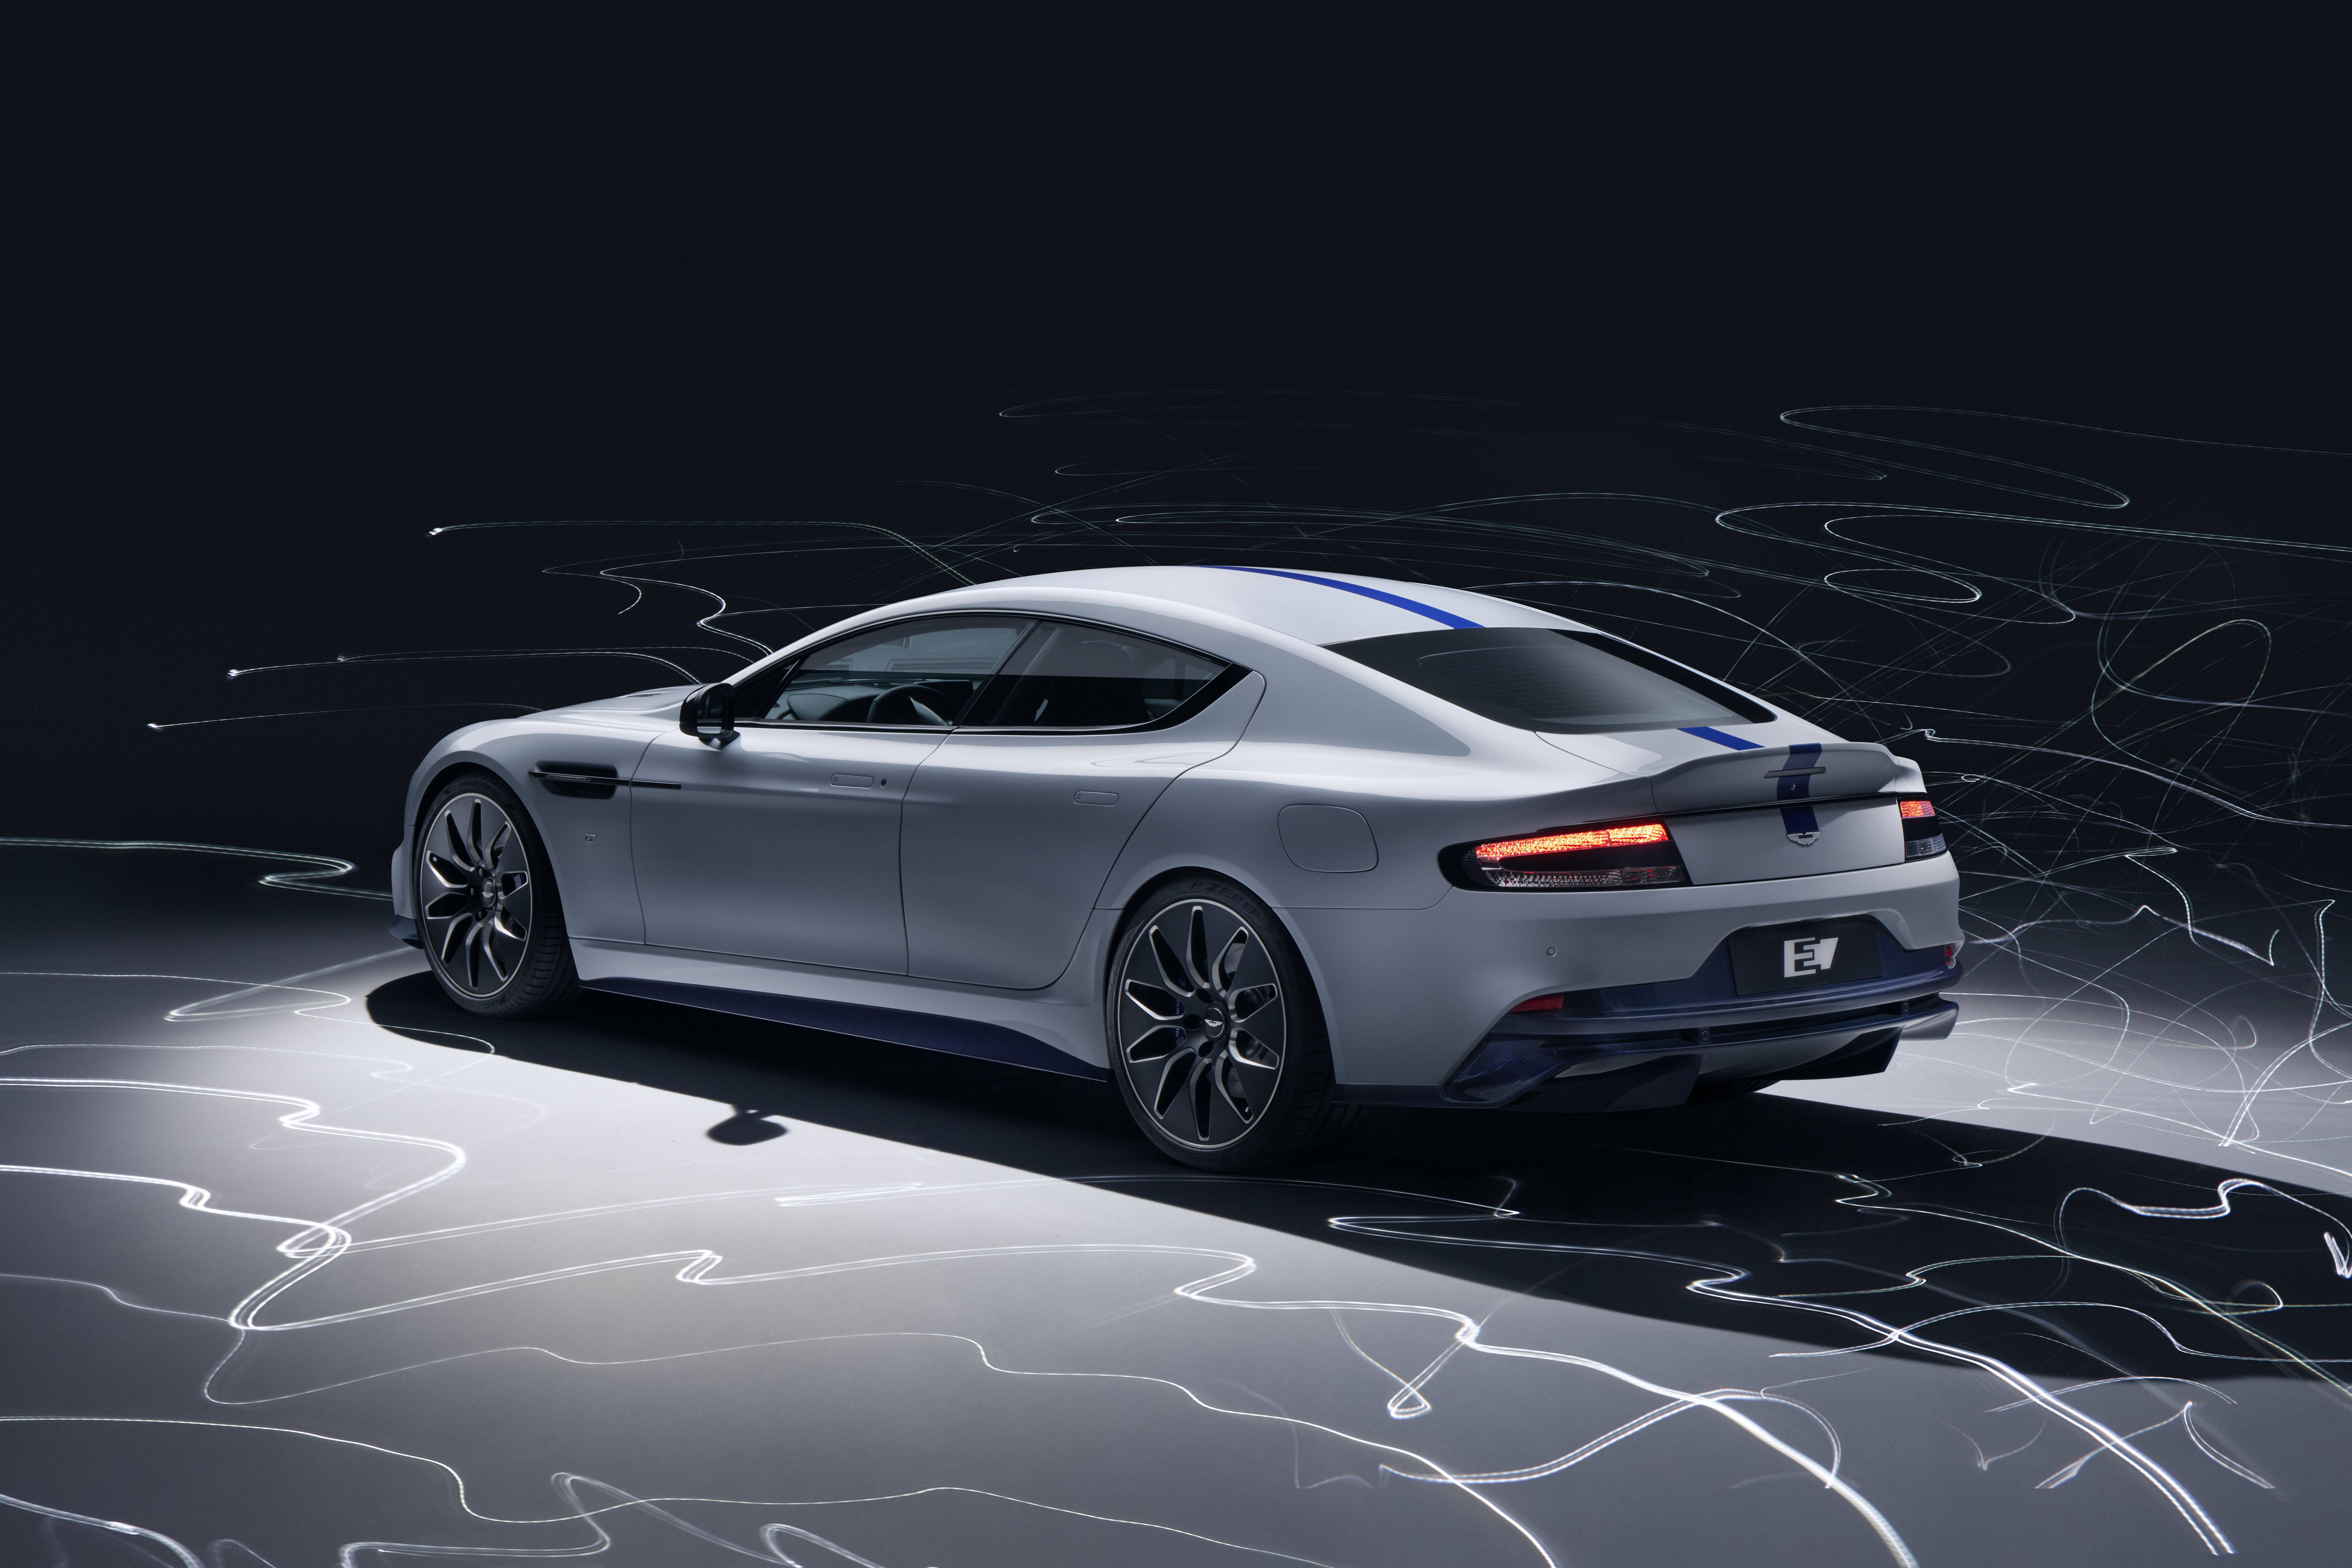 2020 2019 Was a Bad Year For Aston Martin and At Least One Model is Paying the Price